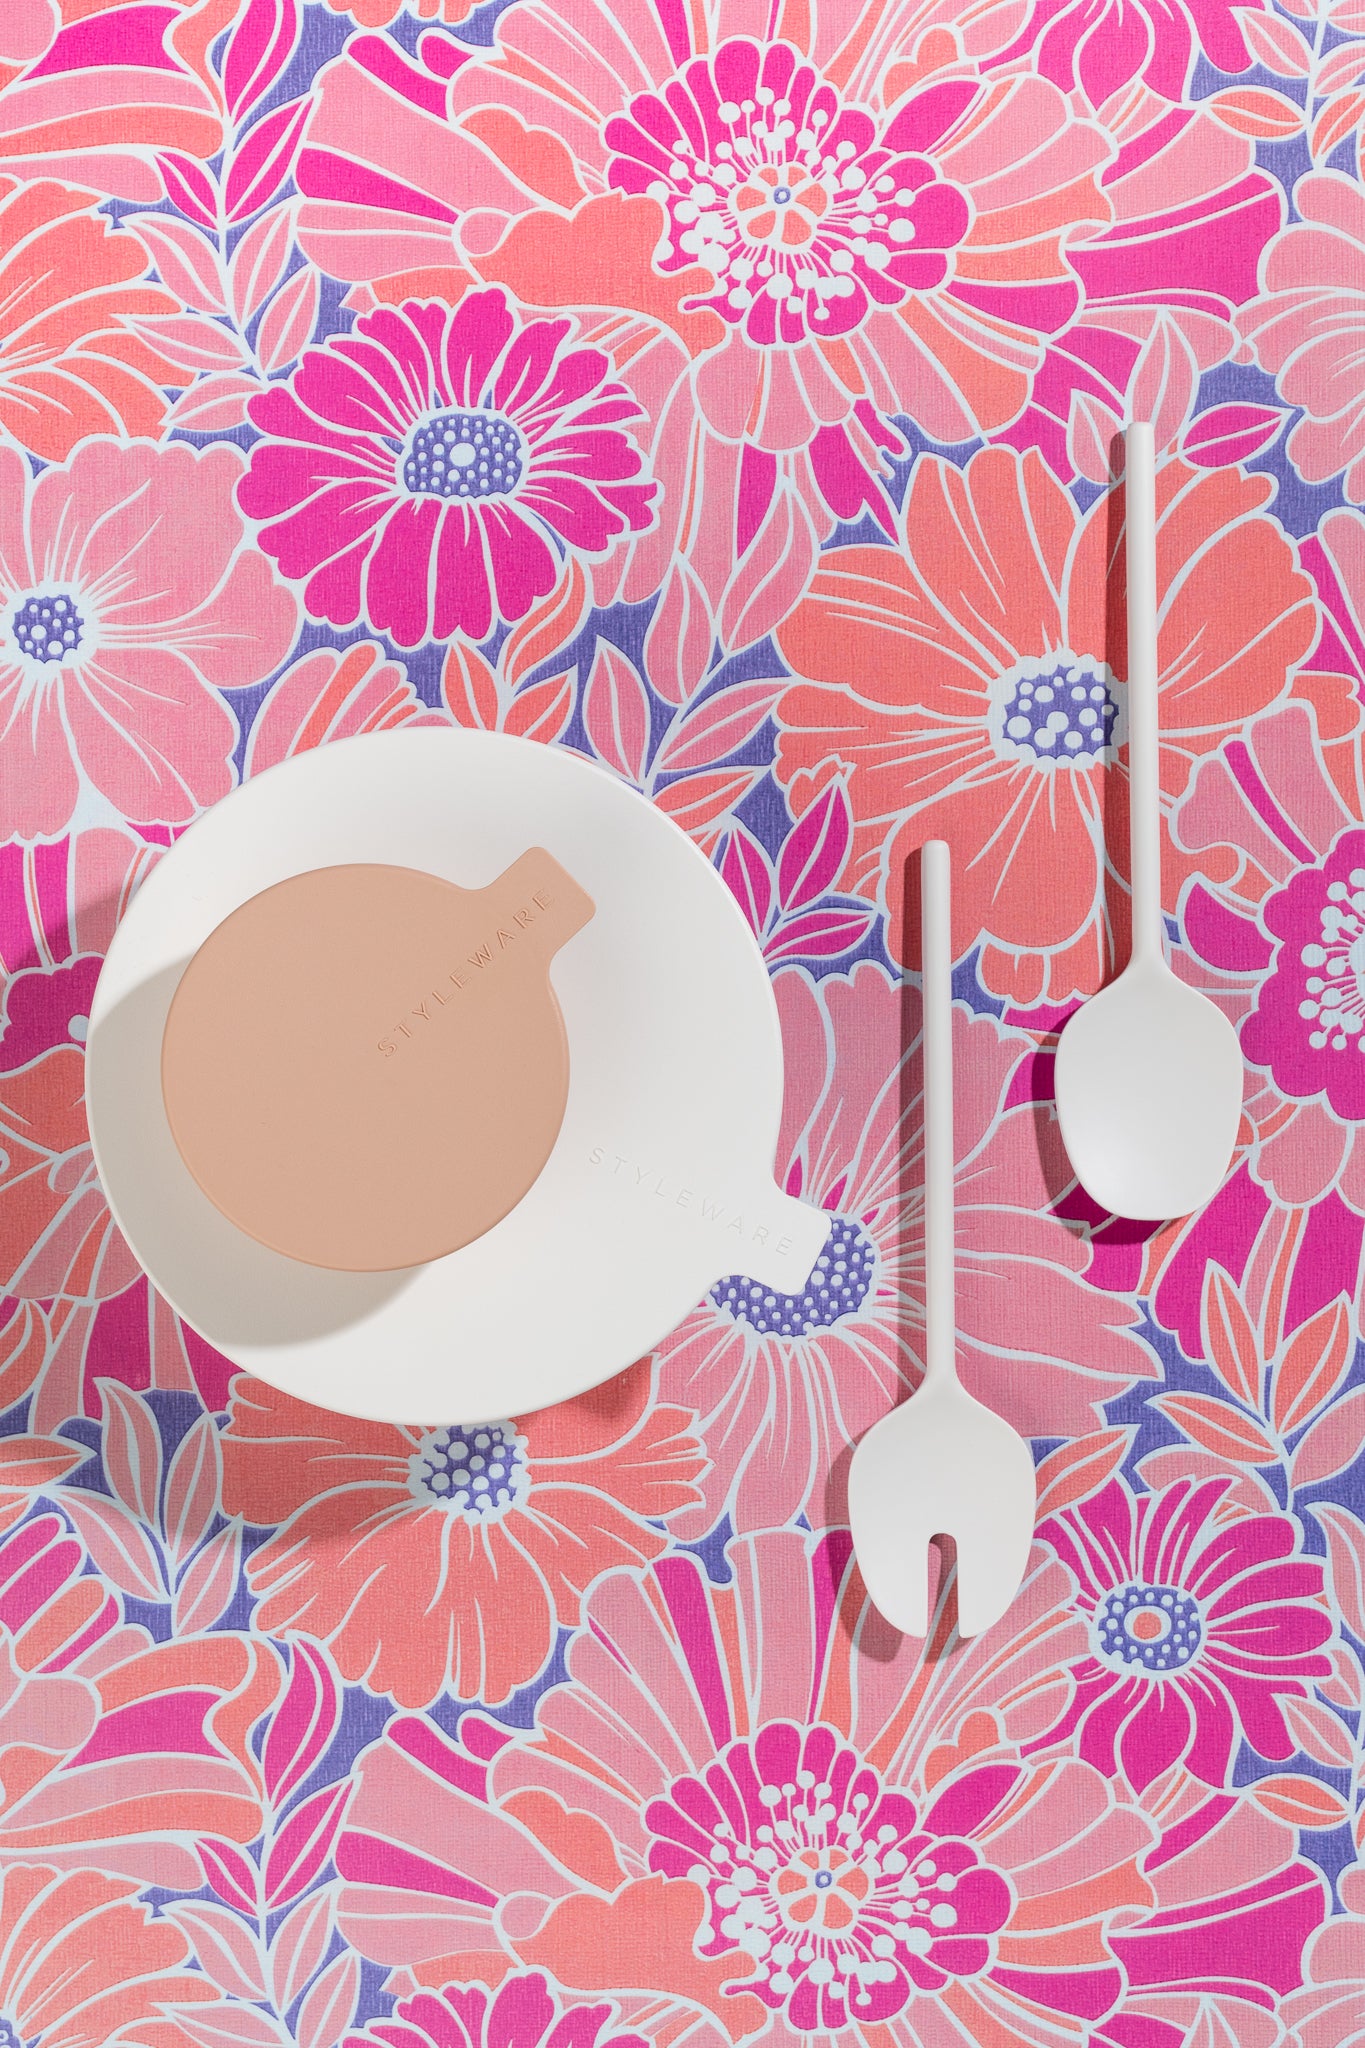 Pastel Pink and Peach A1 Photography Backdrop - Floral Vintage Wallpaper